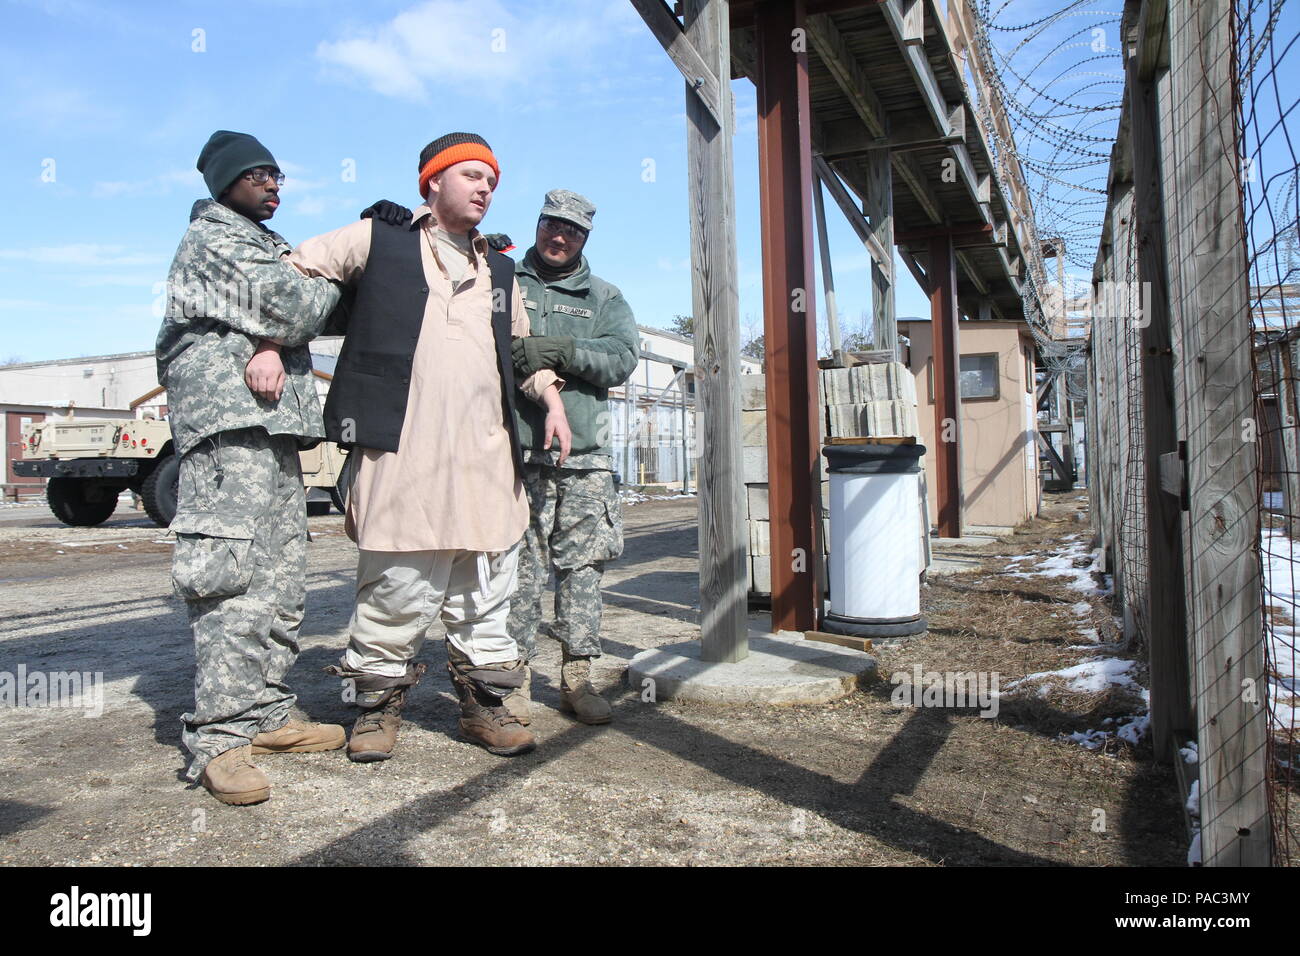 U.S. Army Soldiers of the 96th Military Police Battalion escort Pvt. Nick Tano of the 342nd Military Police Company (MP Company) to a simulated detention center on Joint Base McGuire-Dix-Lakehurst, N.J., March 5, 2016. Tano along with Soldiers of the 342nd MP Company acted as notional detainees to improve unit training during Combat Support Training Exercise 78-16-01. Stock Photo